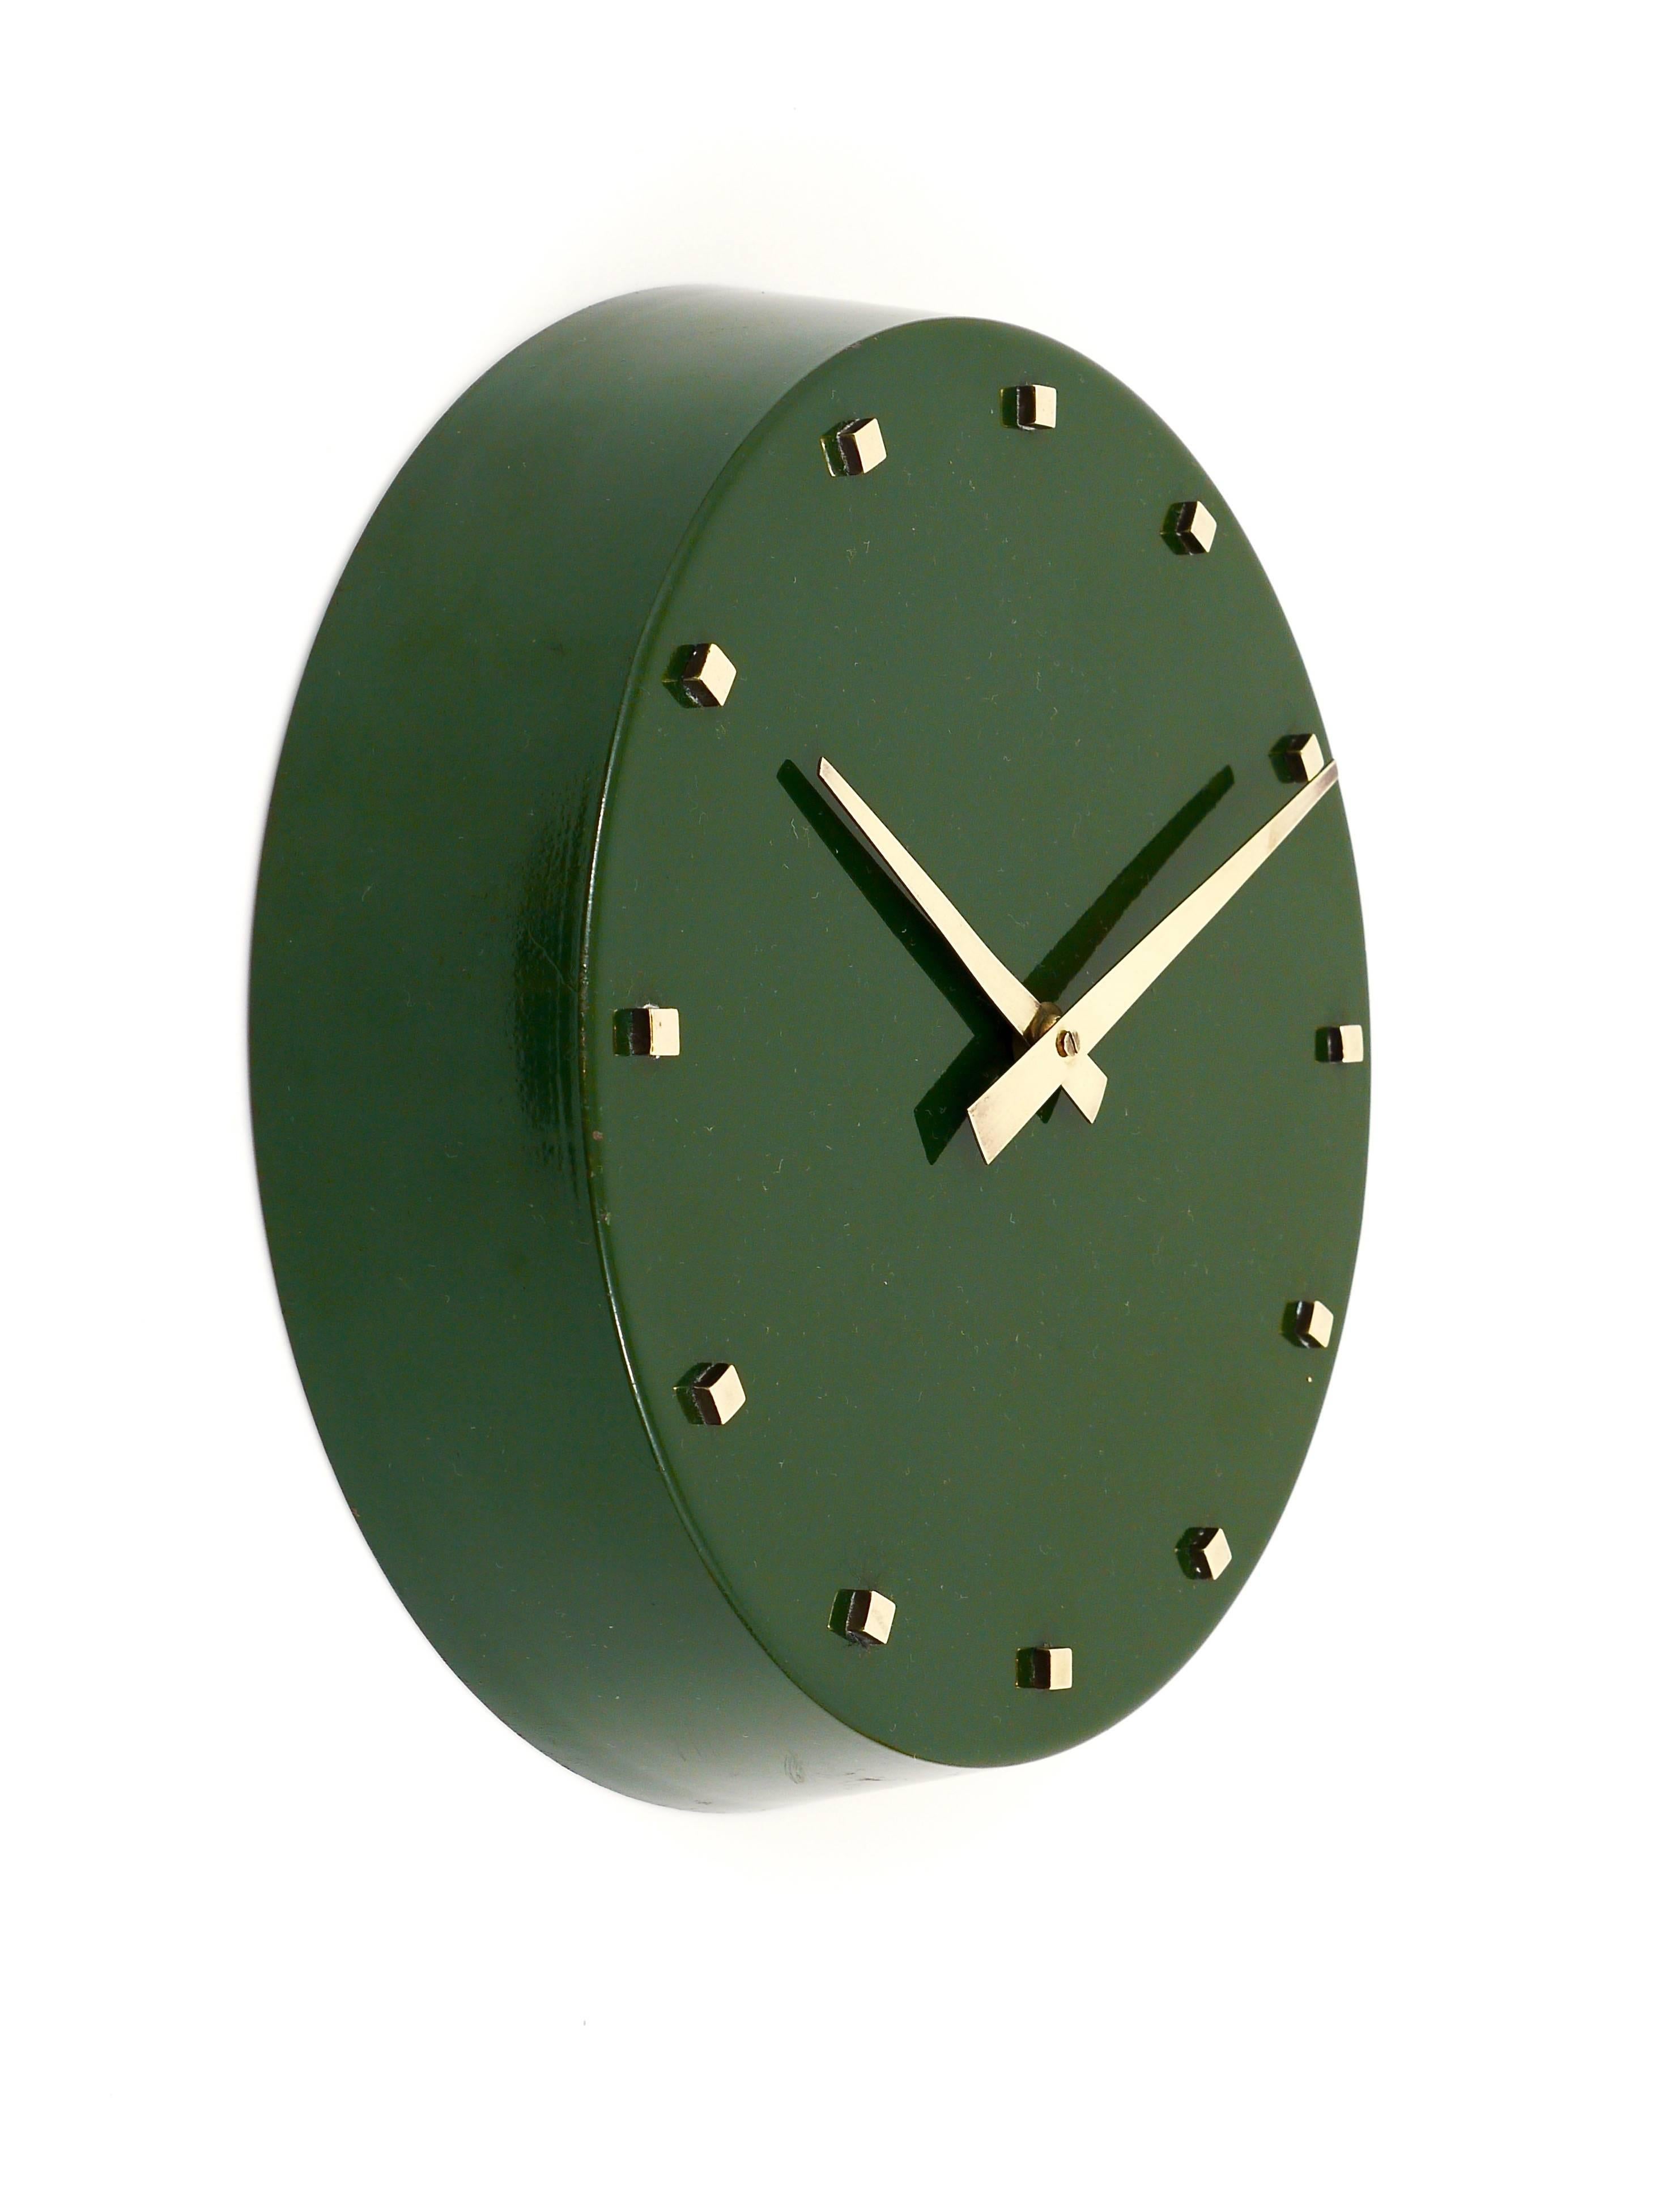 A beautiful green Mid-Century wall clock, designed by Franz Hagenauer, executed by Werkstätte Hagenauer WHW in the 1950s. This clock is completely handcrafted, it has a green lacquered metal housing and very beautiful brass hands and handmade